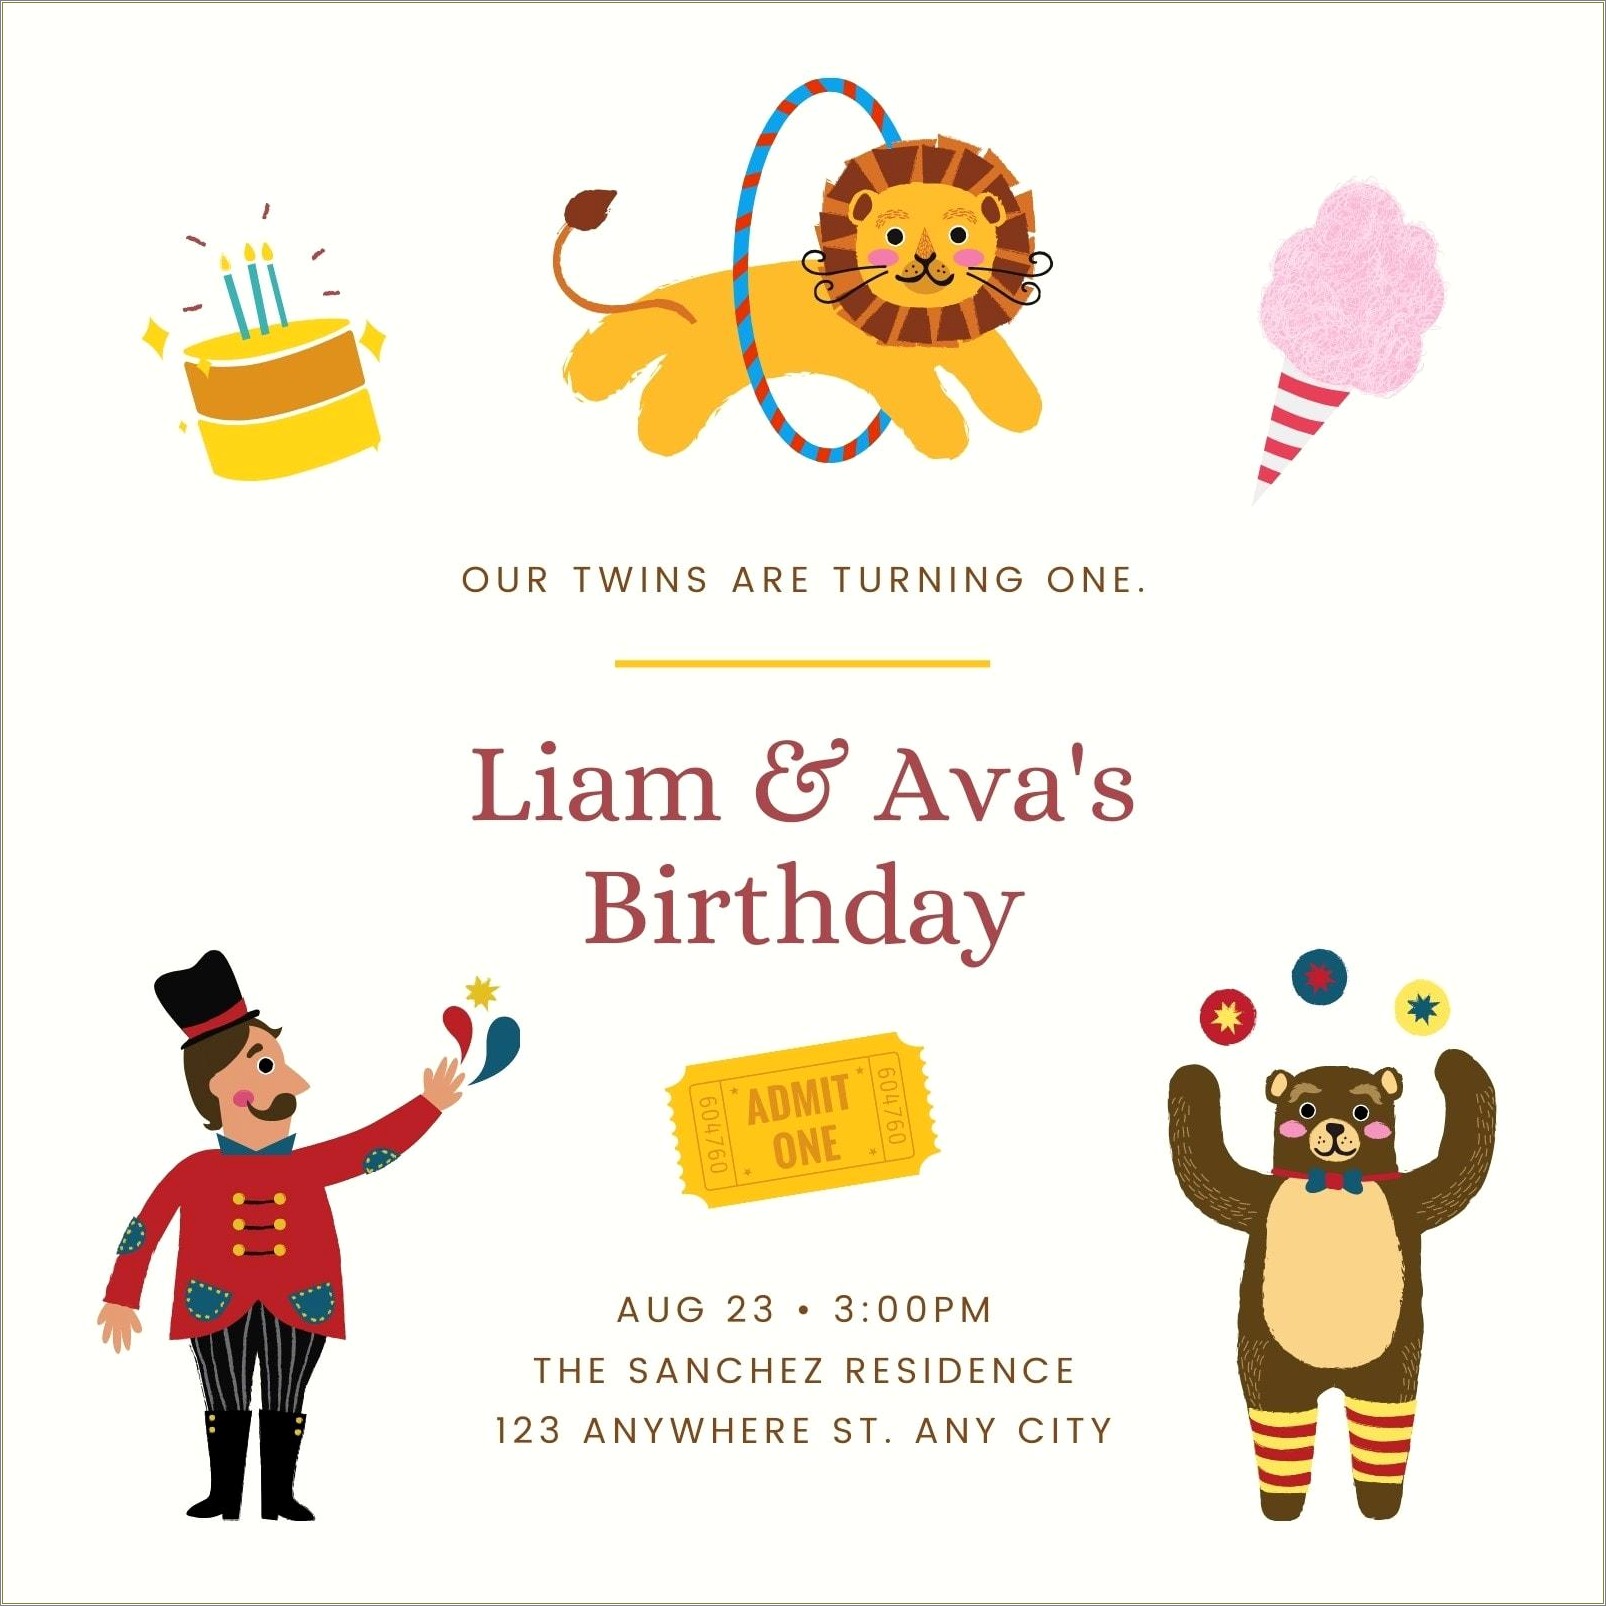 Email Invitation Templates Free For A Birthday